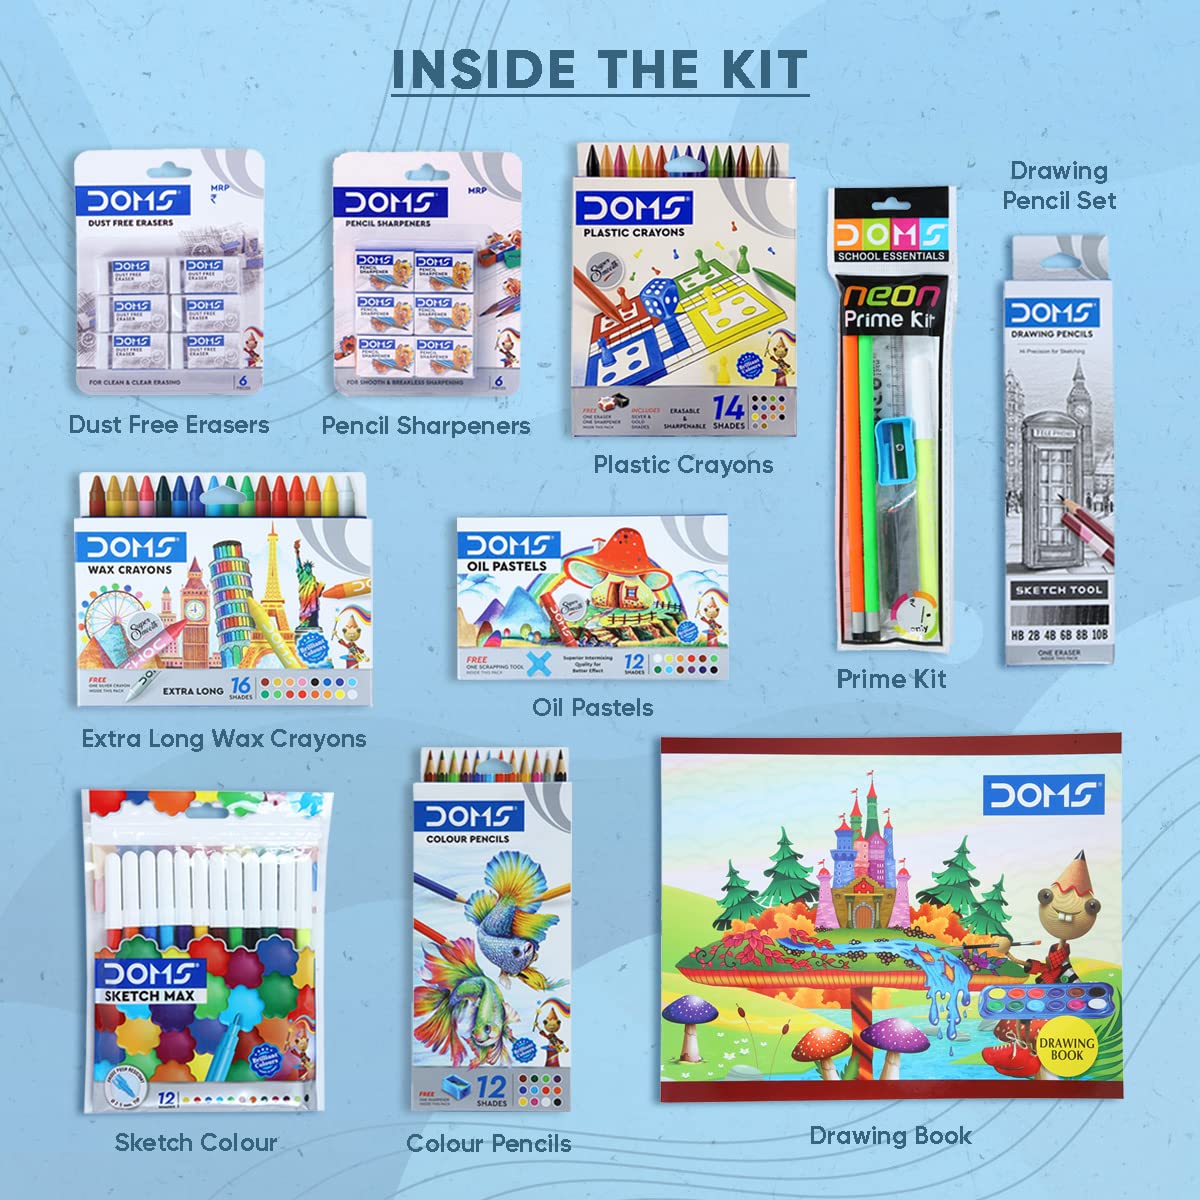 Doms Colouring Smart Kit Mega Gift Pack | Colouring Set for Kids | Best for School, College & Office | 20 Assorted Items | Colour Pencil, Wax Crayons, Sketch Pen, Drawing Book Stationery